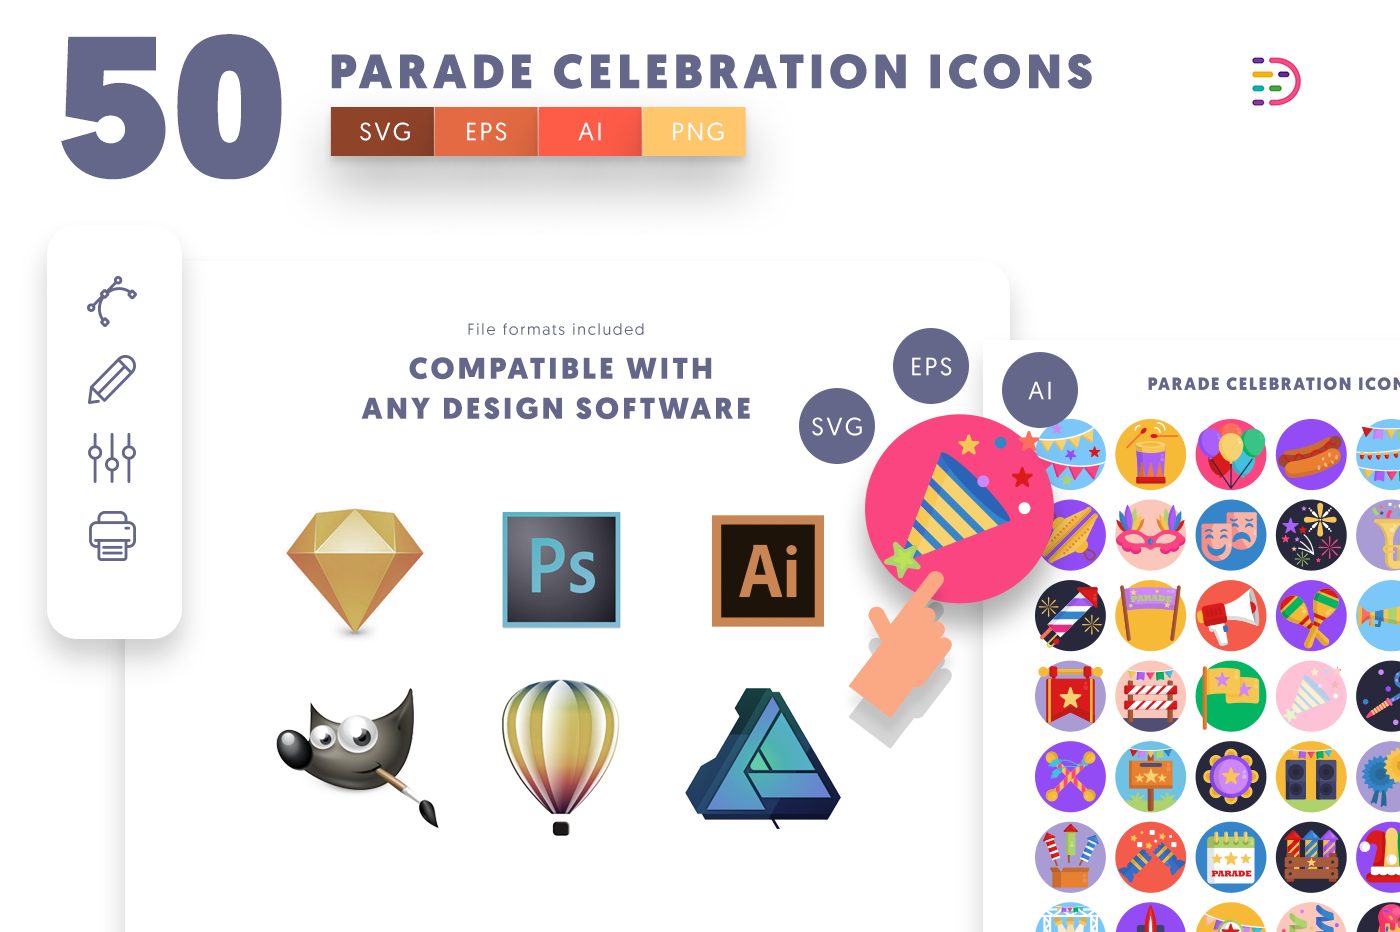  full vector 50 Parade Celebration Icons EPS, SVG, PNG